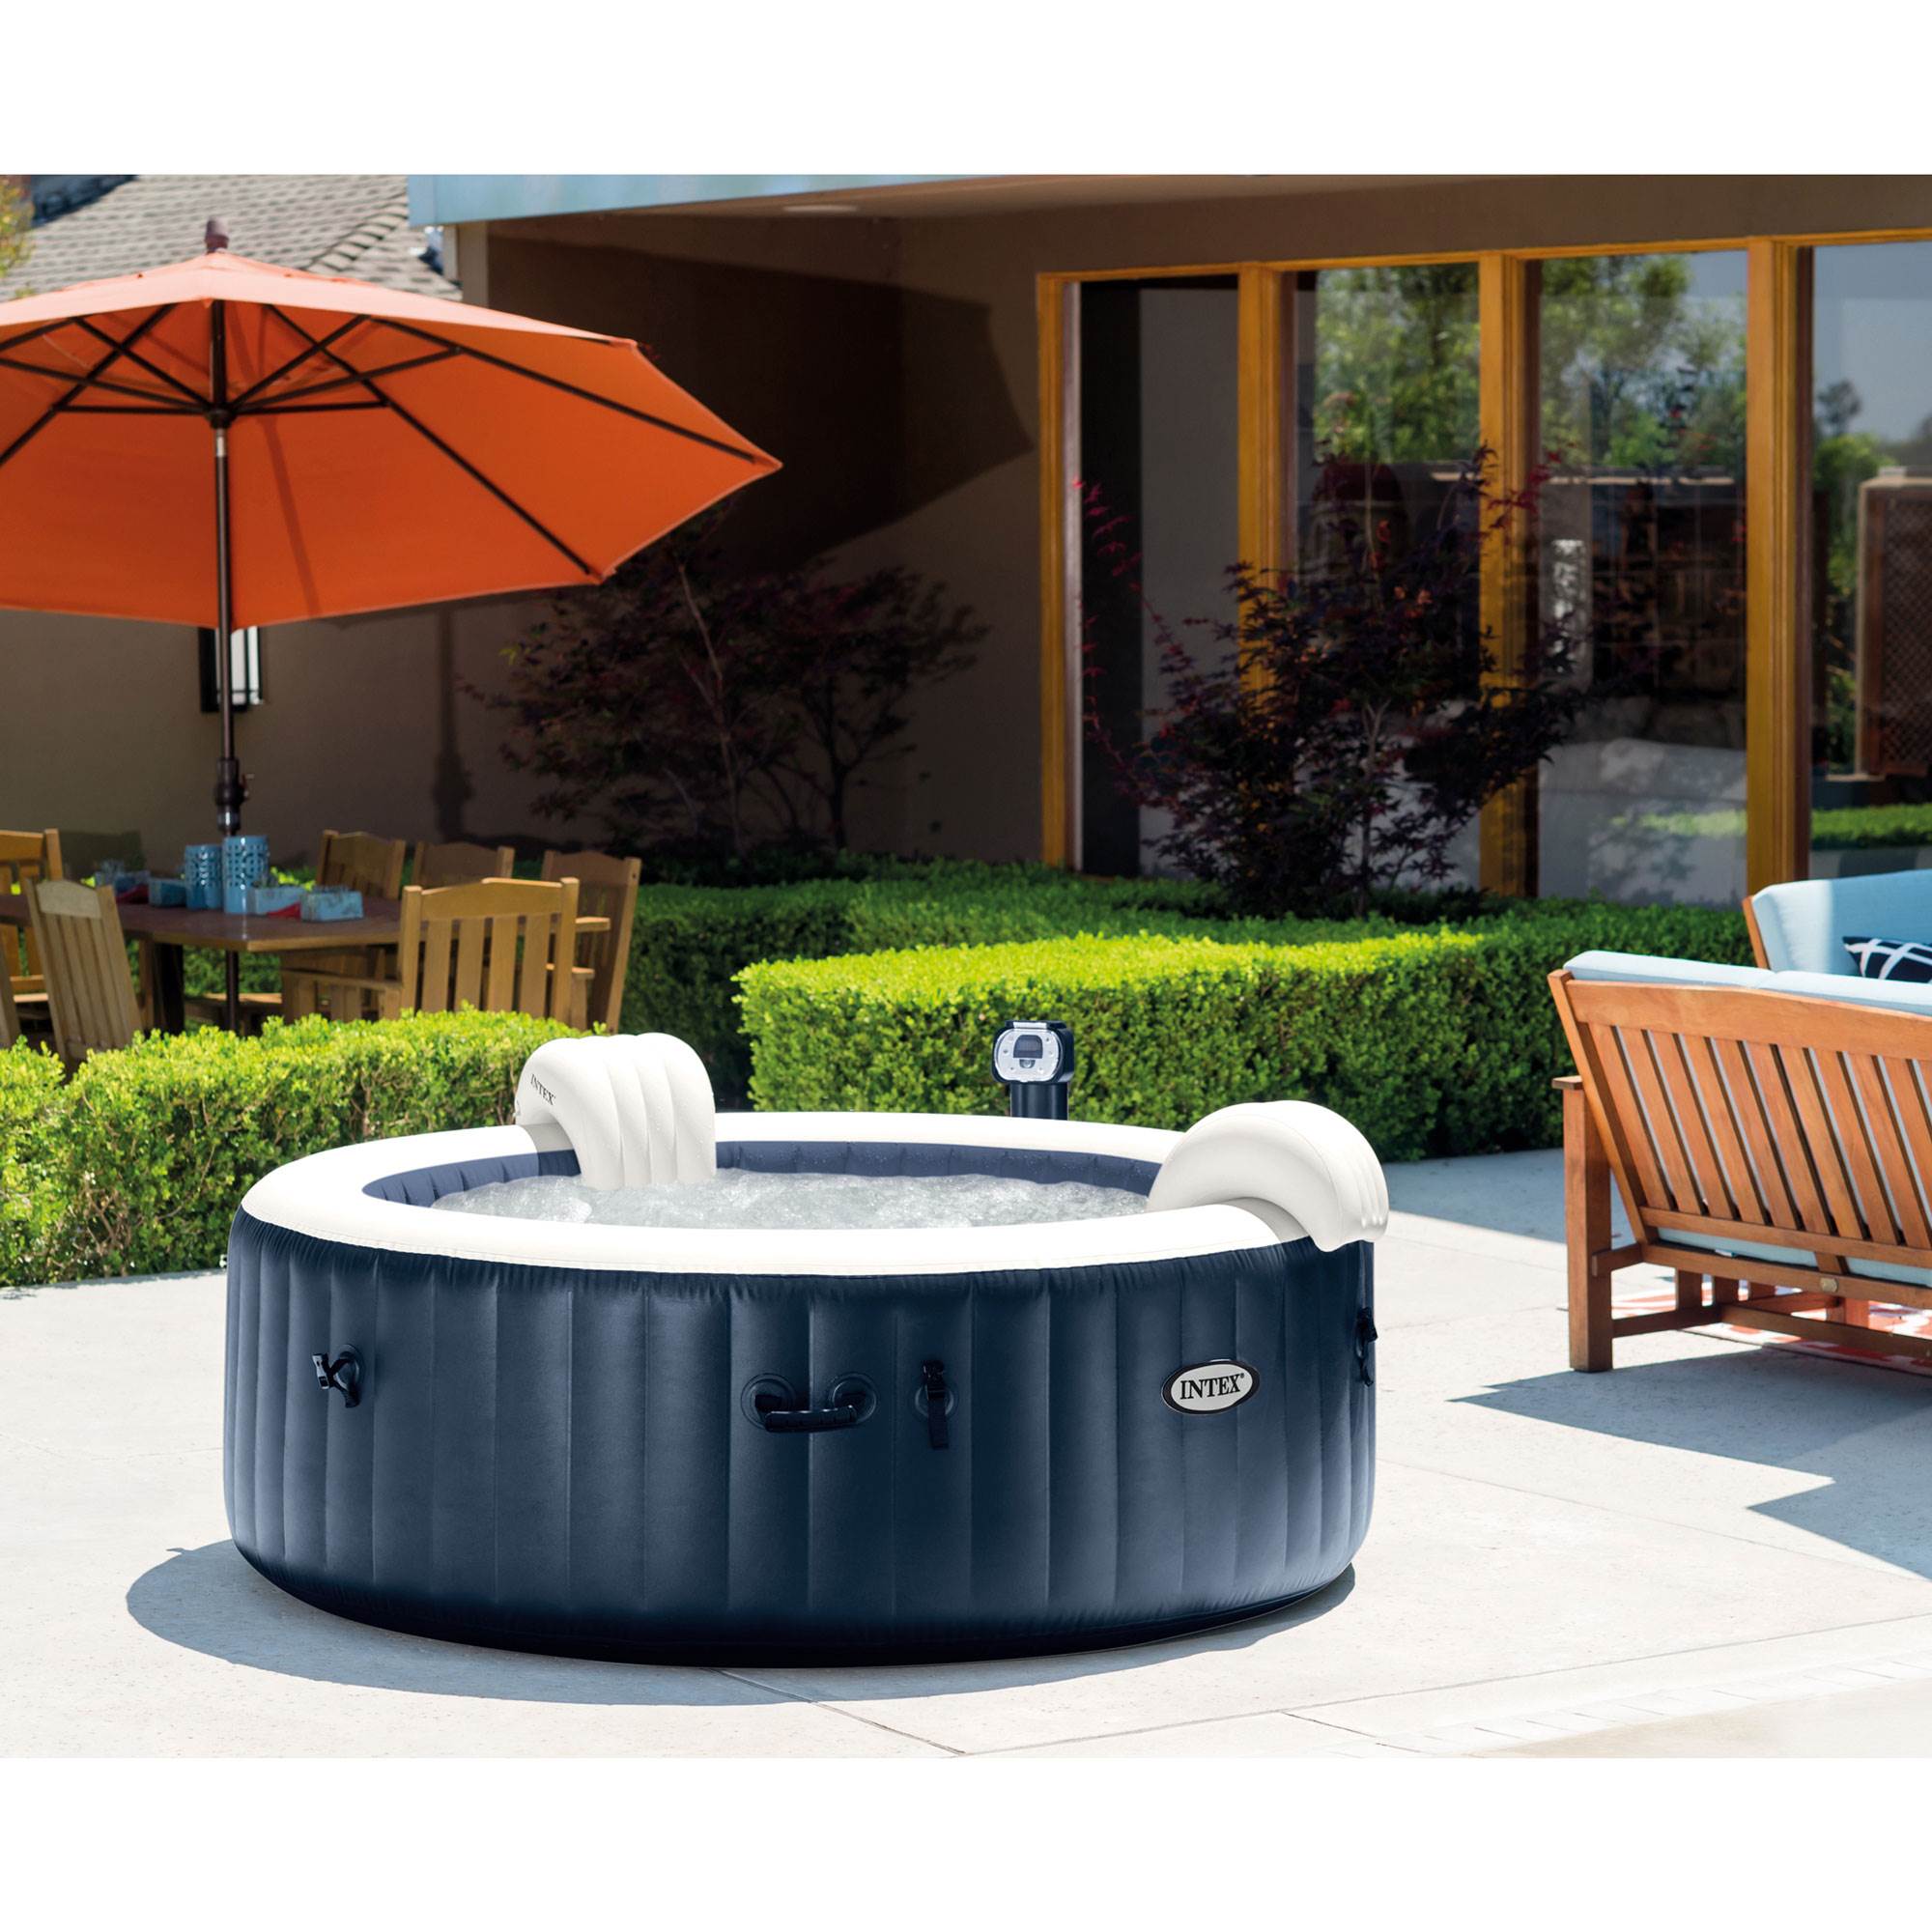 Intex Purespa 4 Person Inflatable Hot Tub Slip Resistant Seat And Foam